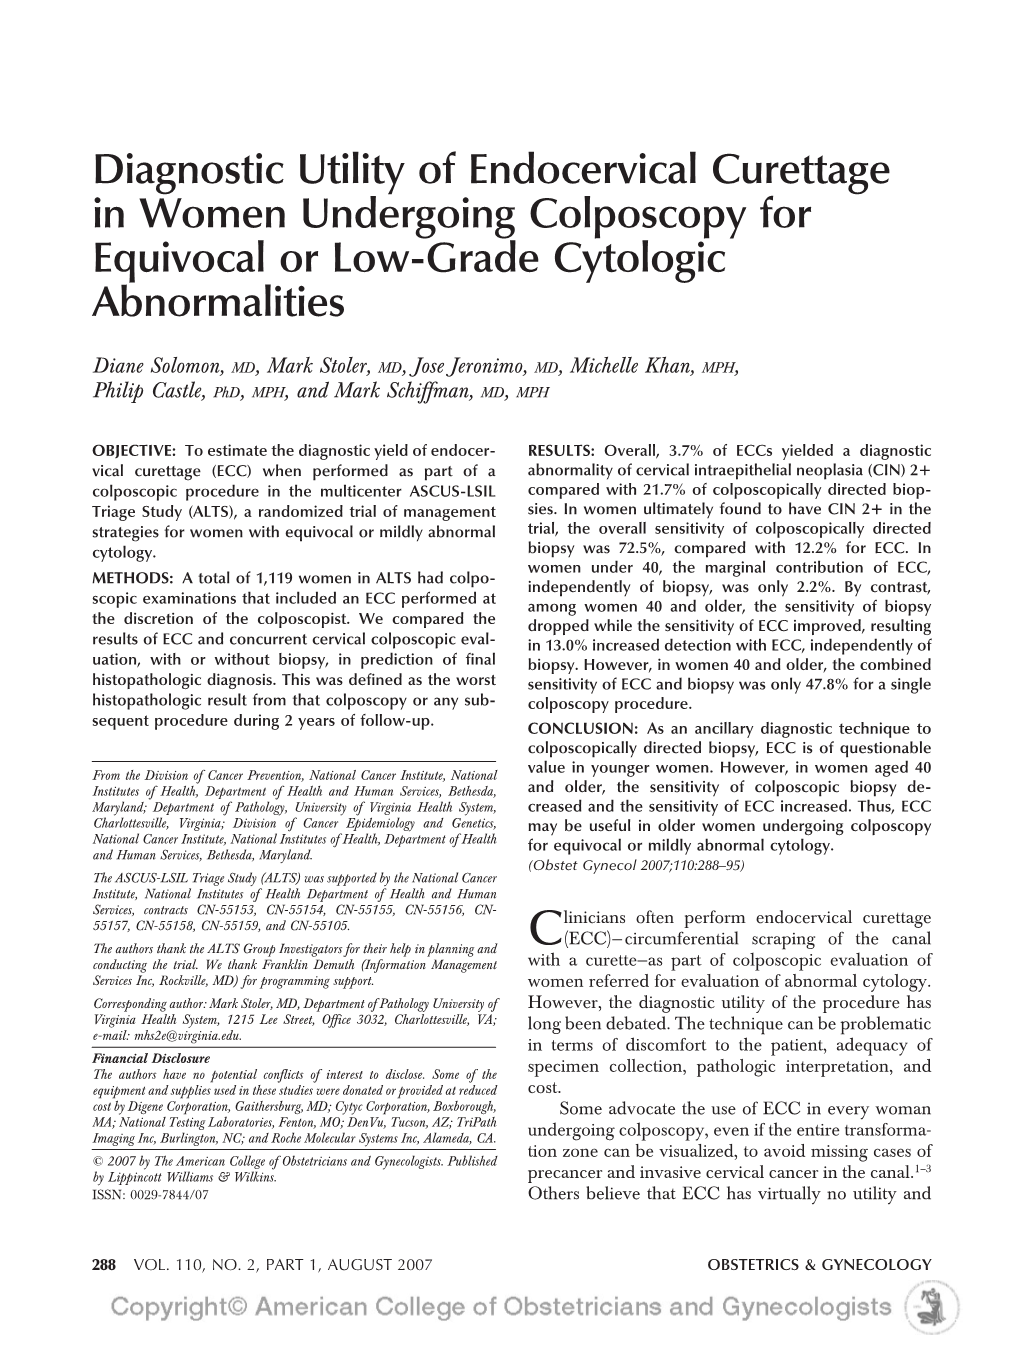 Diagnostic Utility of Endocervical Curettage in Women Undergoing Colposcopy for Equivocal Or Low-Grade Cytologic Abnormalities